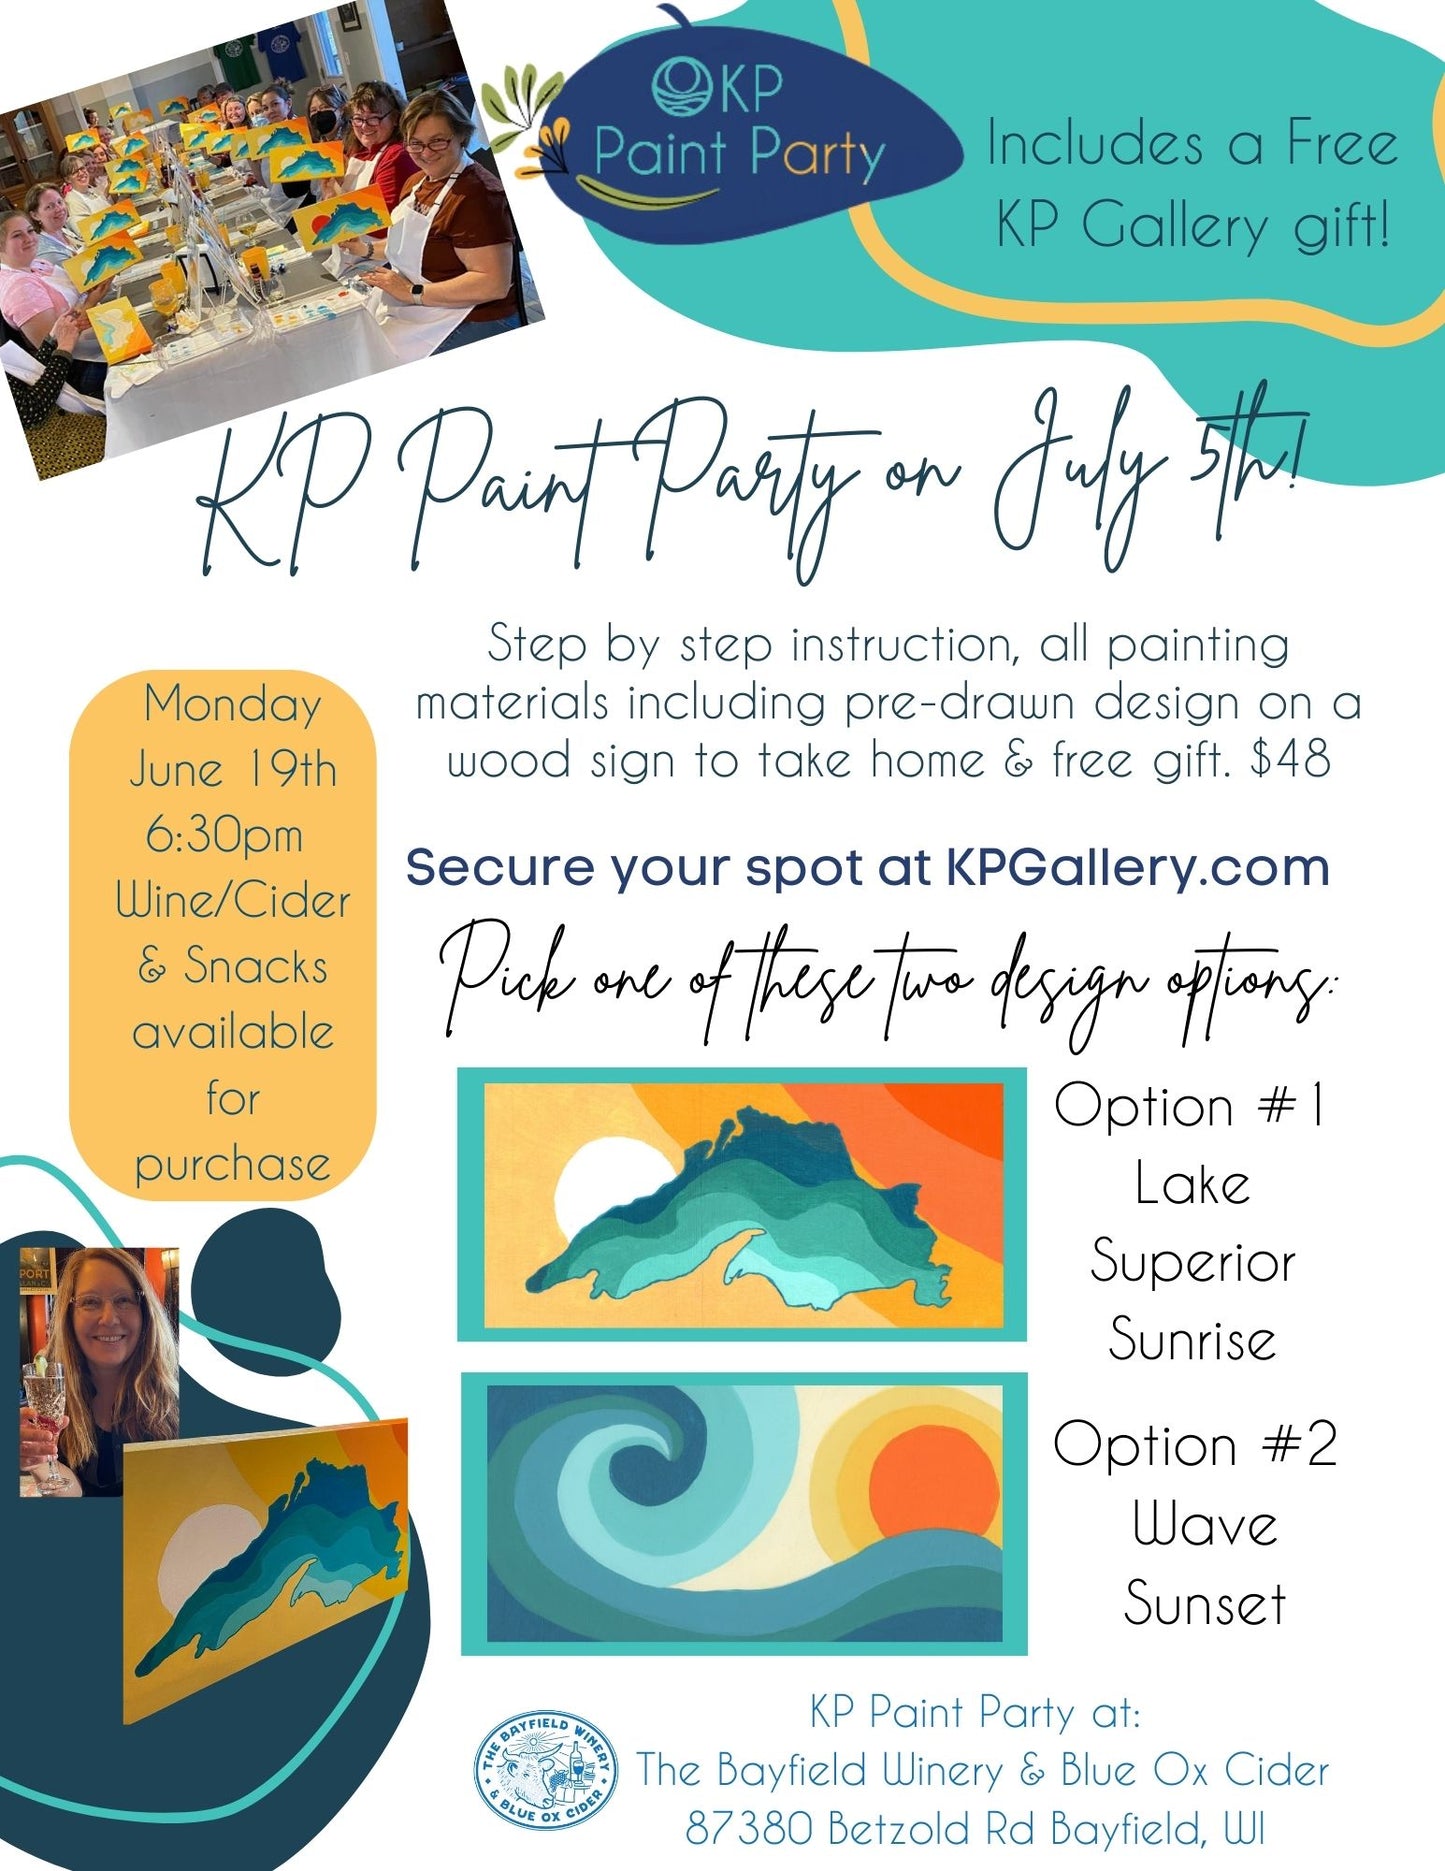 July 5th KP Paint Party!!! Lake Superior Sunrise OR Wave Sunset Design Wednesday Night 6:30pm!